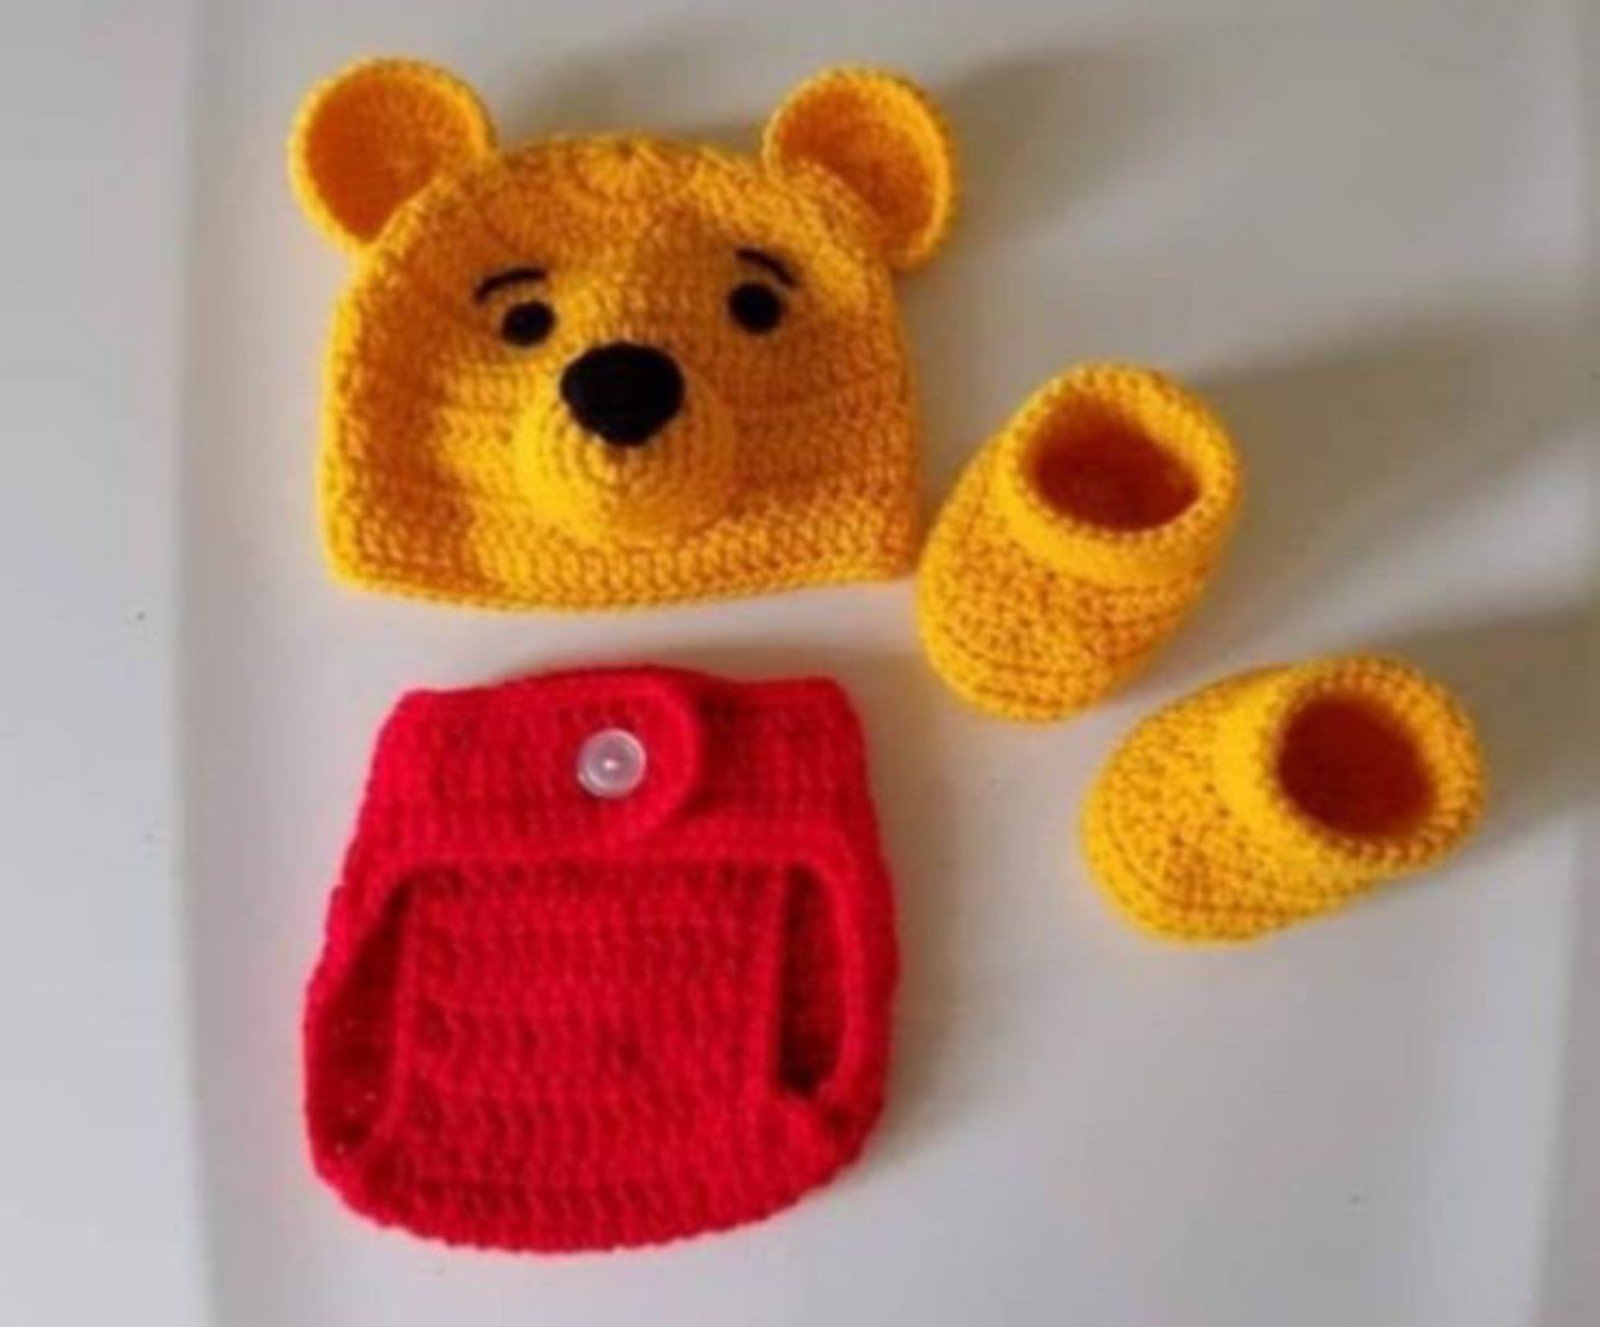 Crochet Baby Boy Winnie The Pooh Inspired Outfit Photo Prop m0BCr0d0n